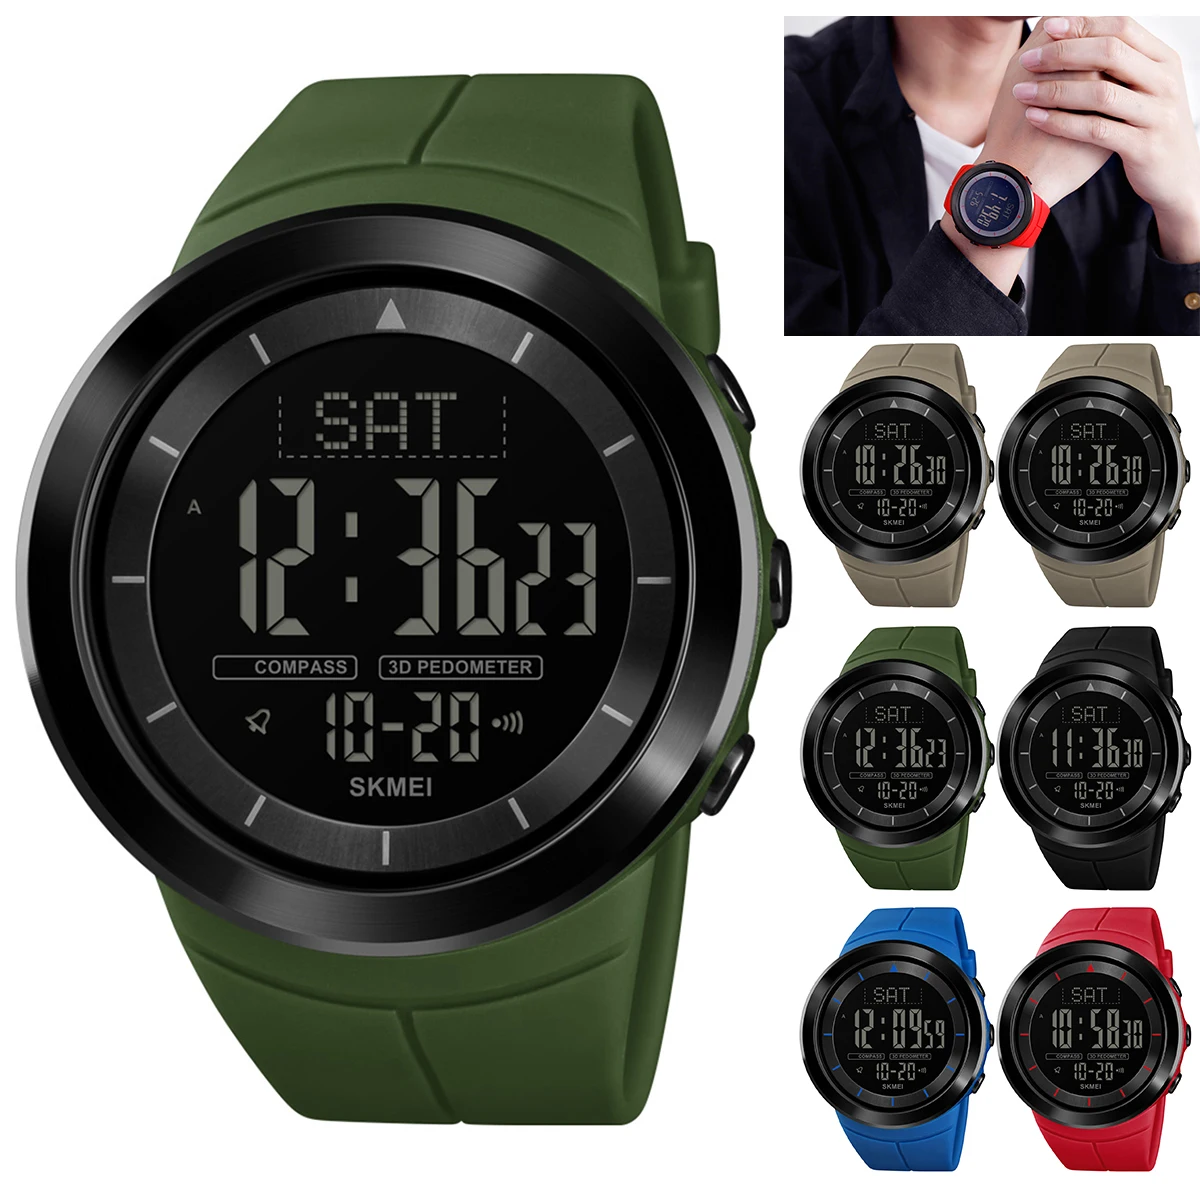 

50M Waterproof Sports Watch Digital EL backlight Compass Pedometer Calorie Wrist Watch for Running Outdoor Hiking Camping